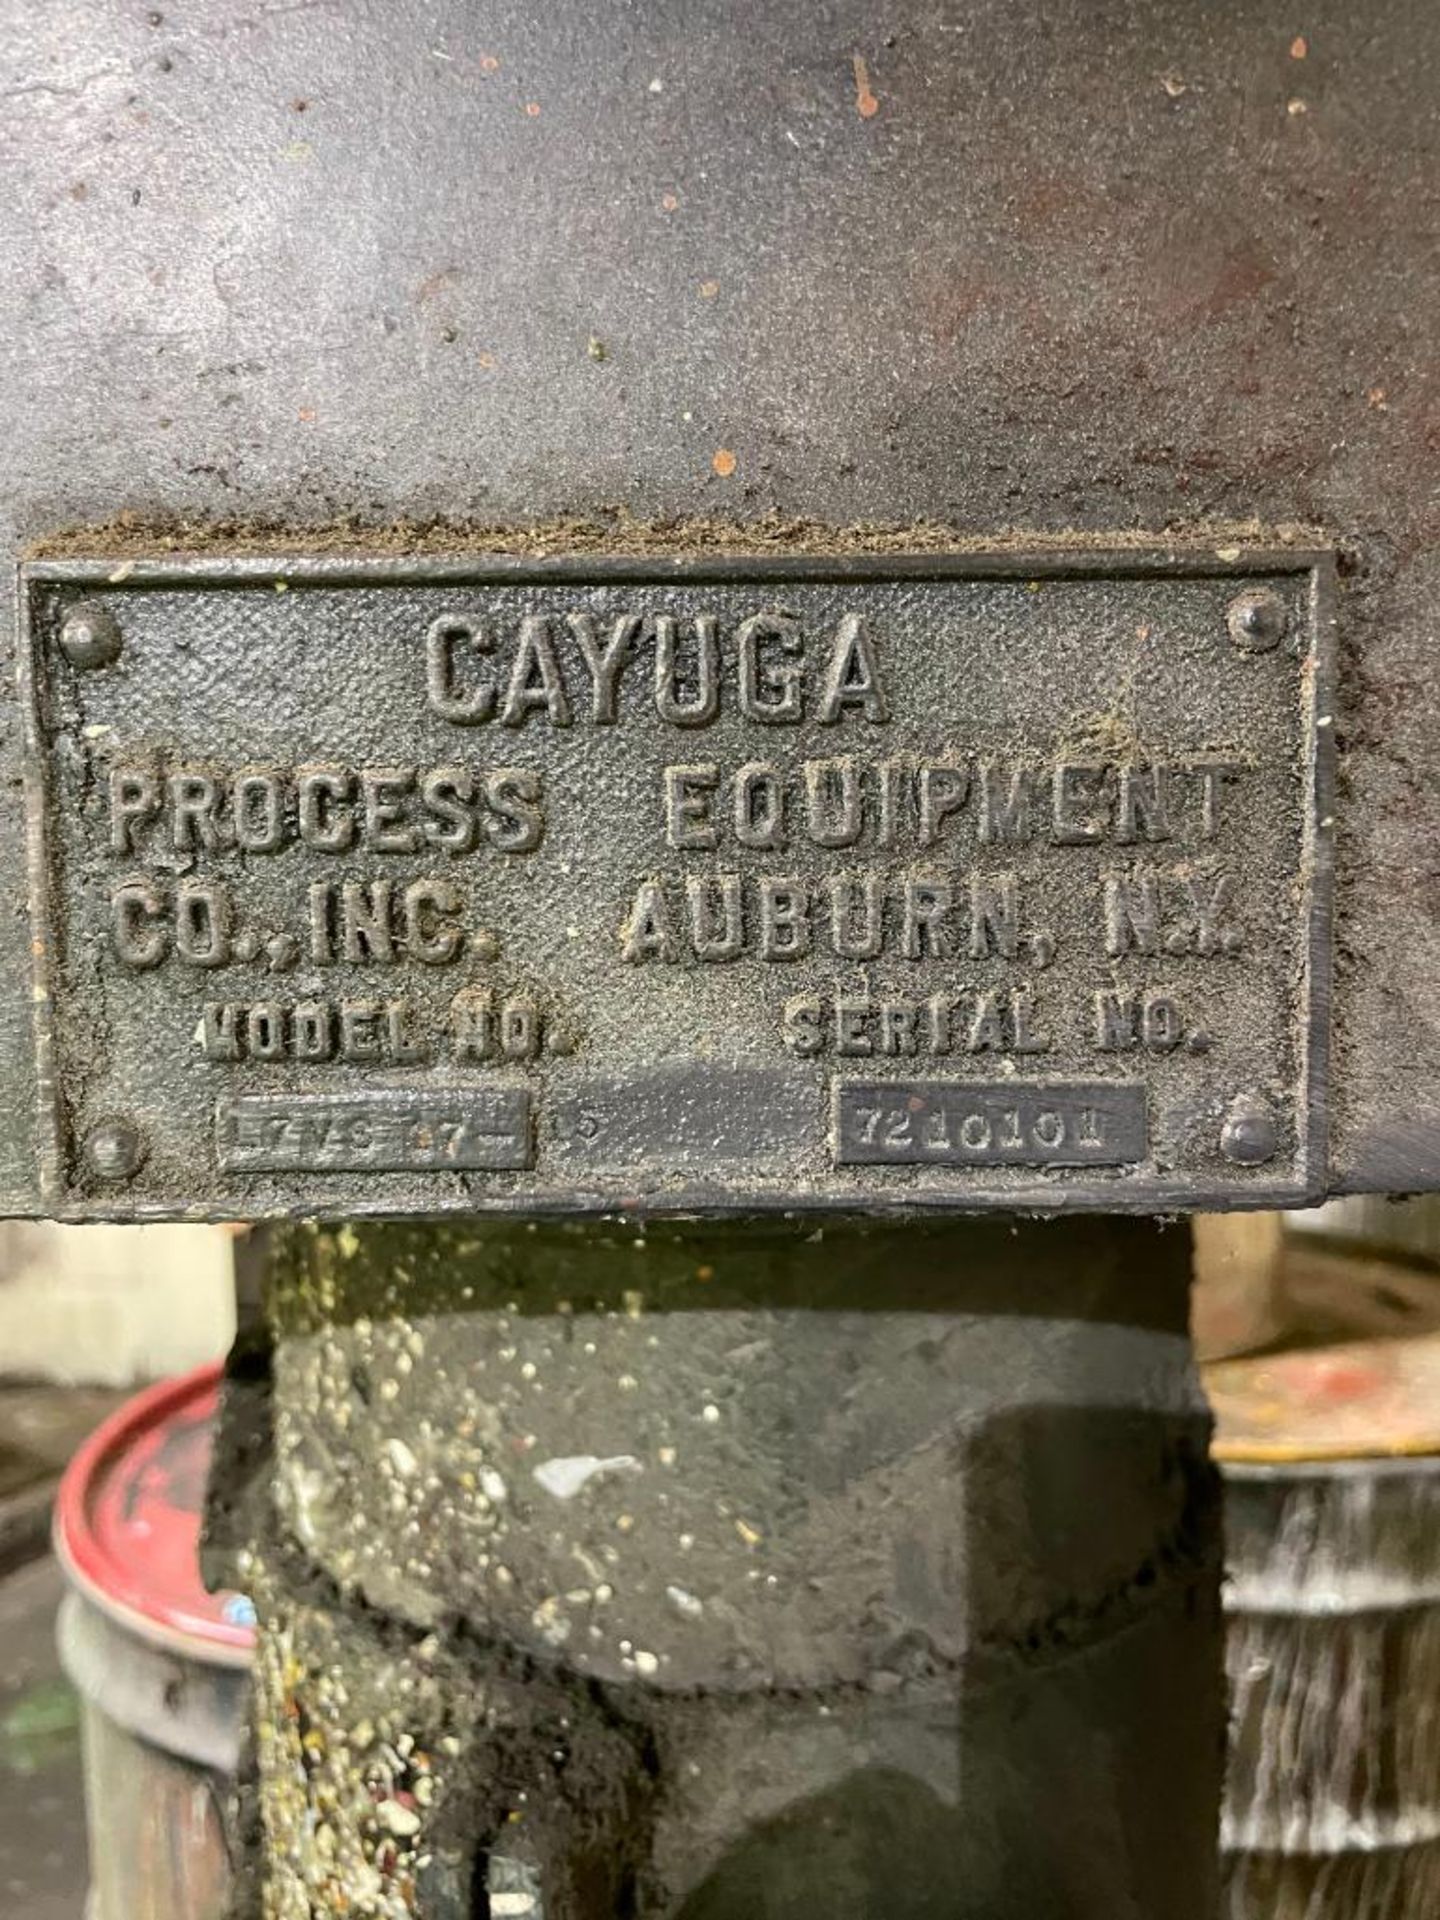 CAYUGA INDUSTRIAL PAINT MIXER LOCATION: MIXER ROOM QTY: 1 - Image 2 of 5